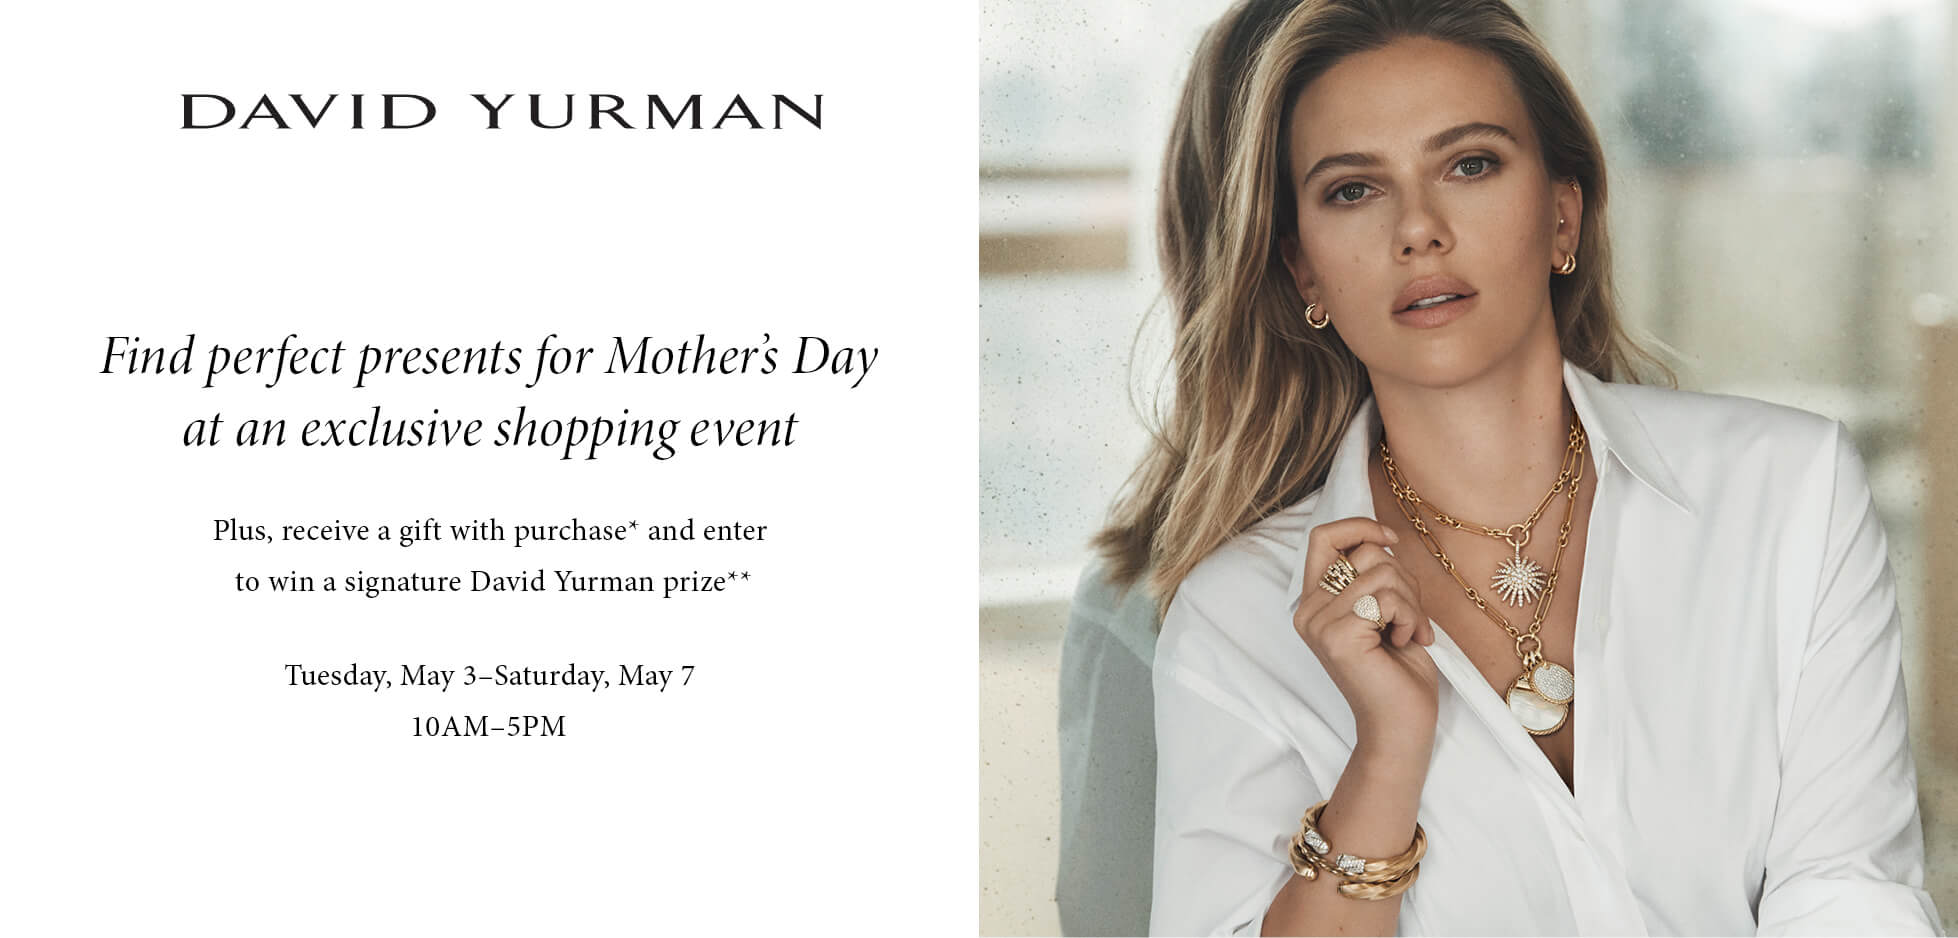 David Yurman Mother's Day Jewelry Event - May 5-7